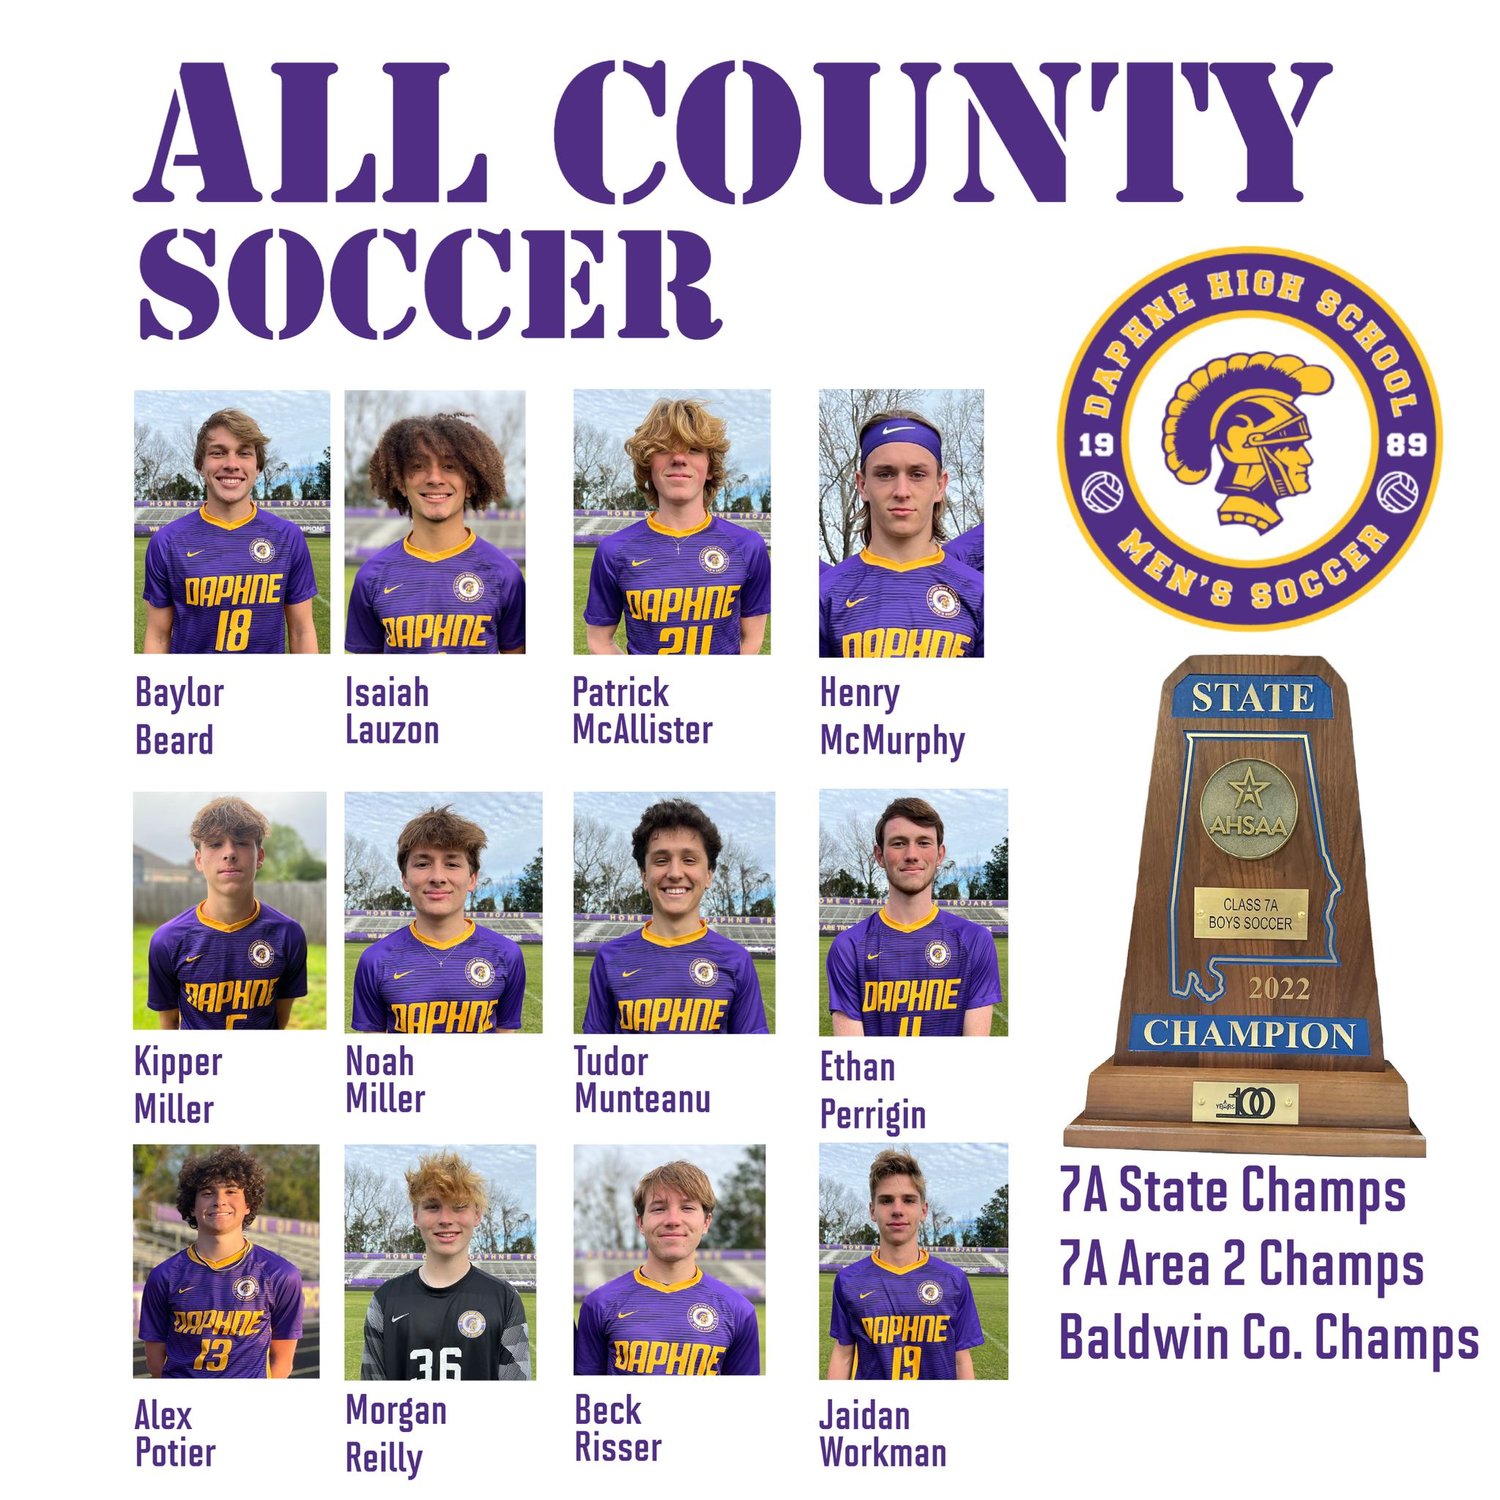 The state-champion Daphne Trojans led the county with 12 representatives on the All-County Soccer team as announced by Baldwin County Public Schools.